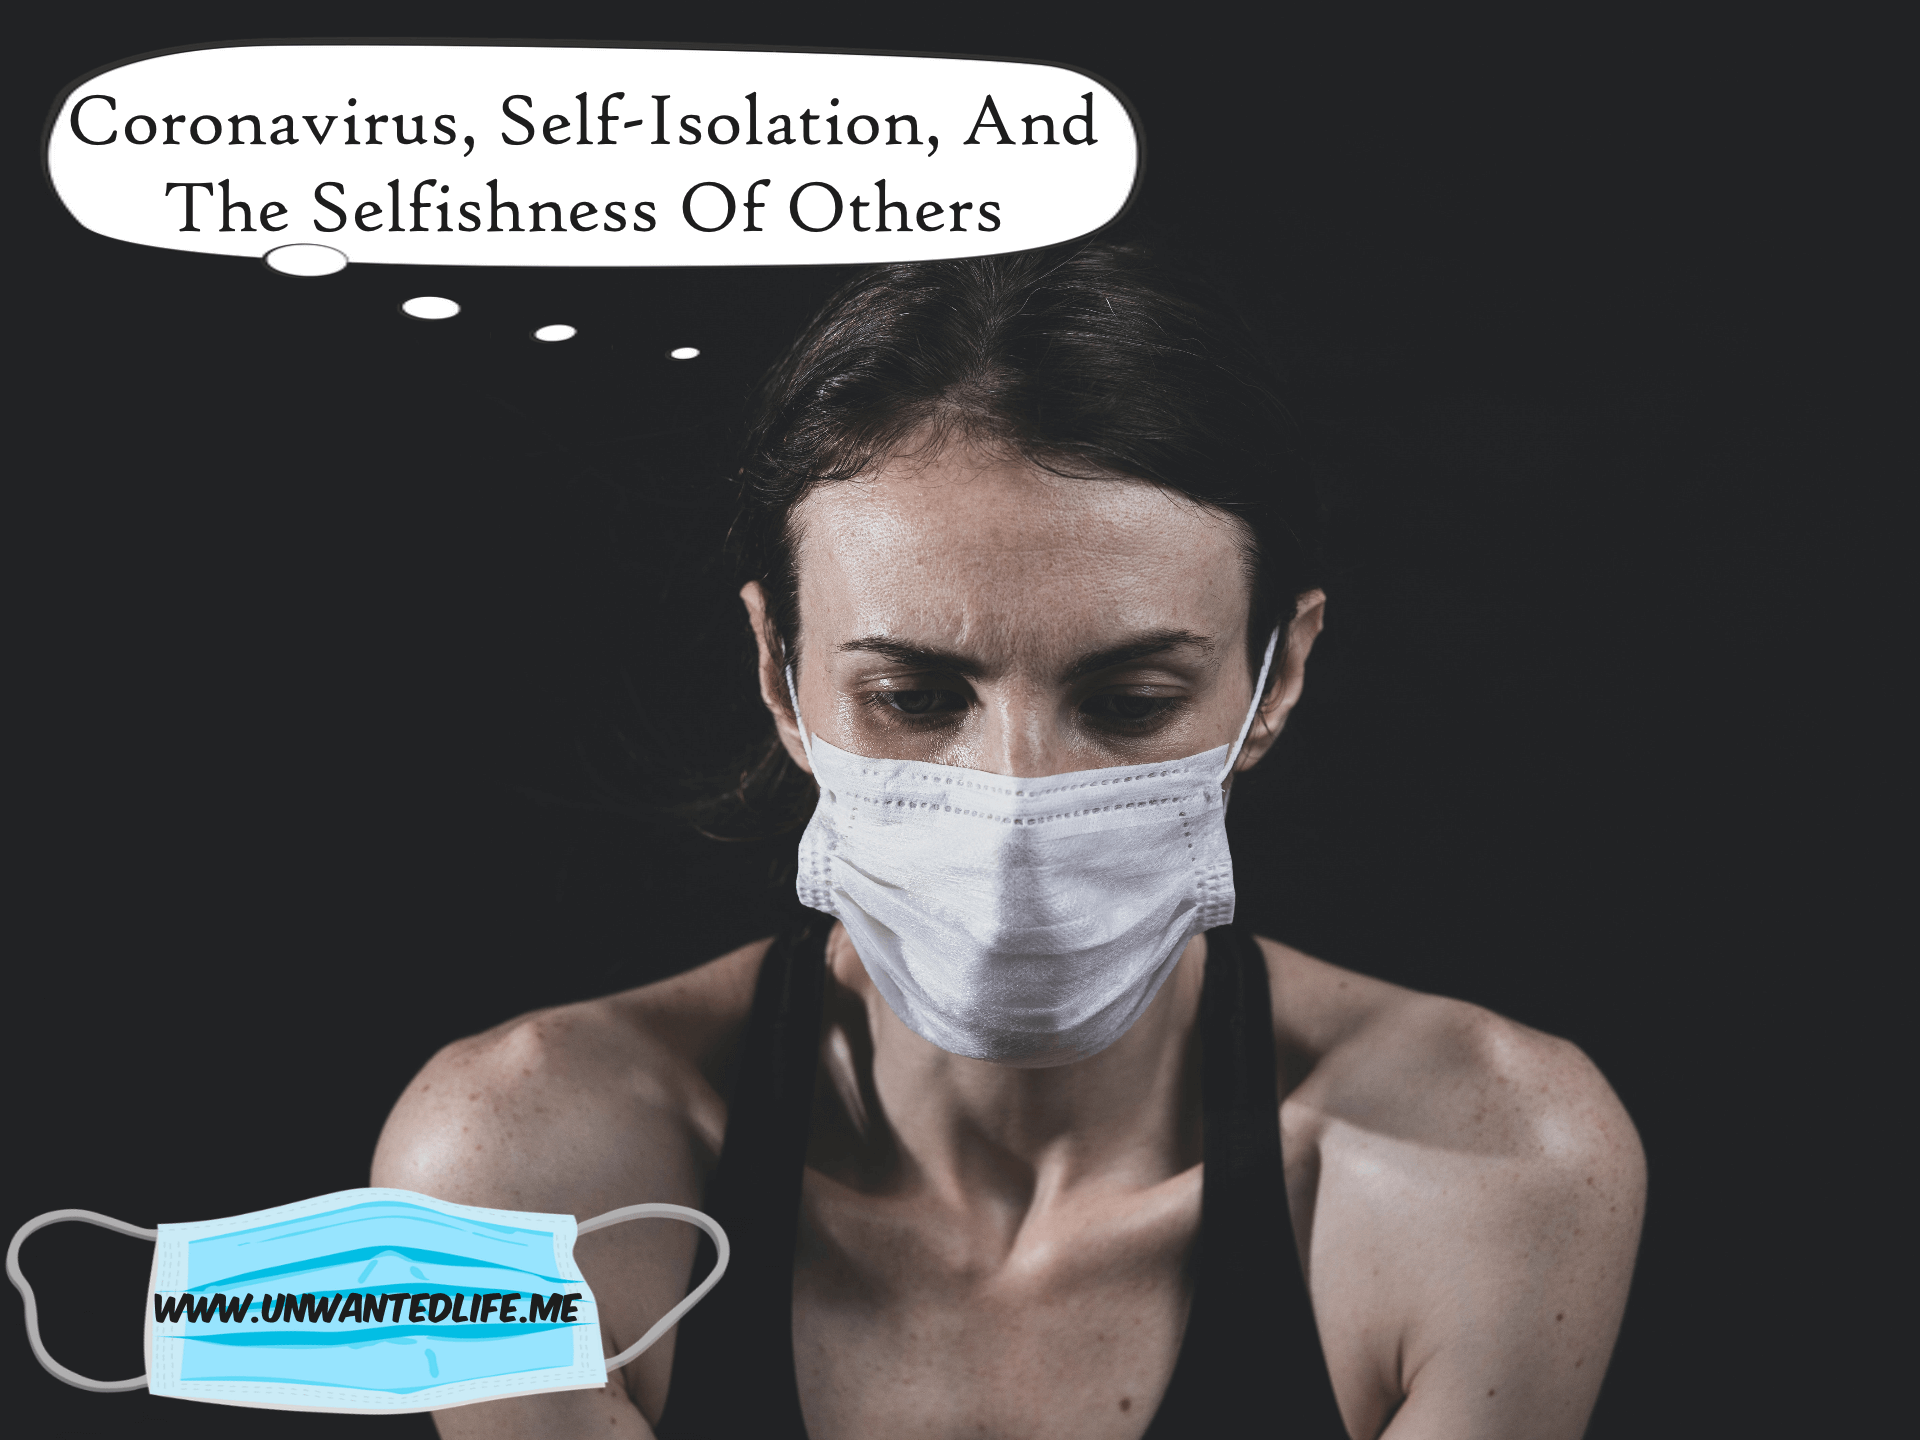 A photo of a white woman wearing a surgical facemask with a thought bubble above her head that says - Coronavirus, Self-Isolation, And The Selfishness Of Others